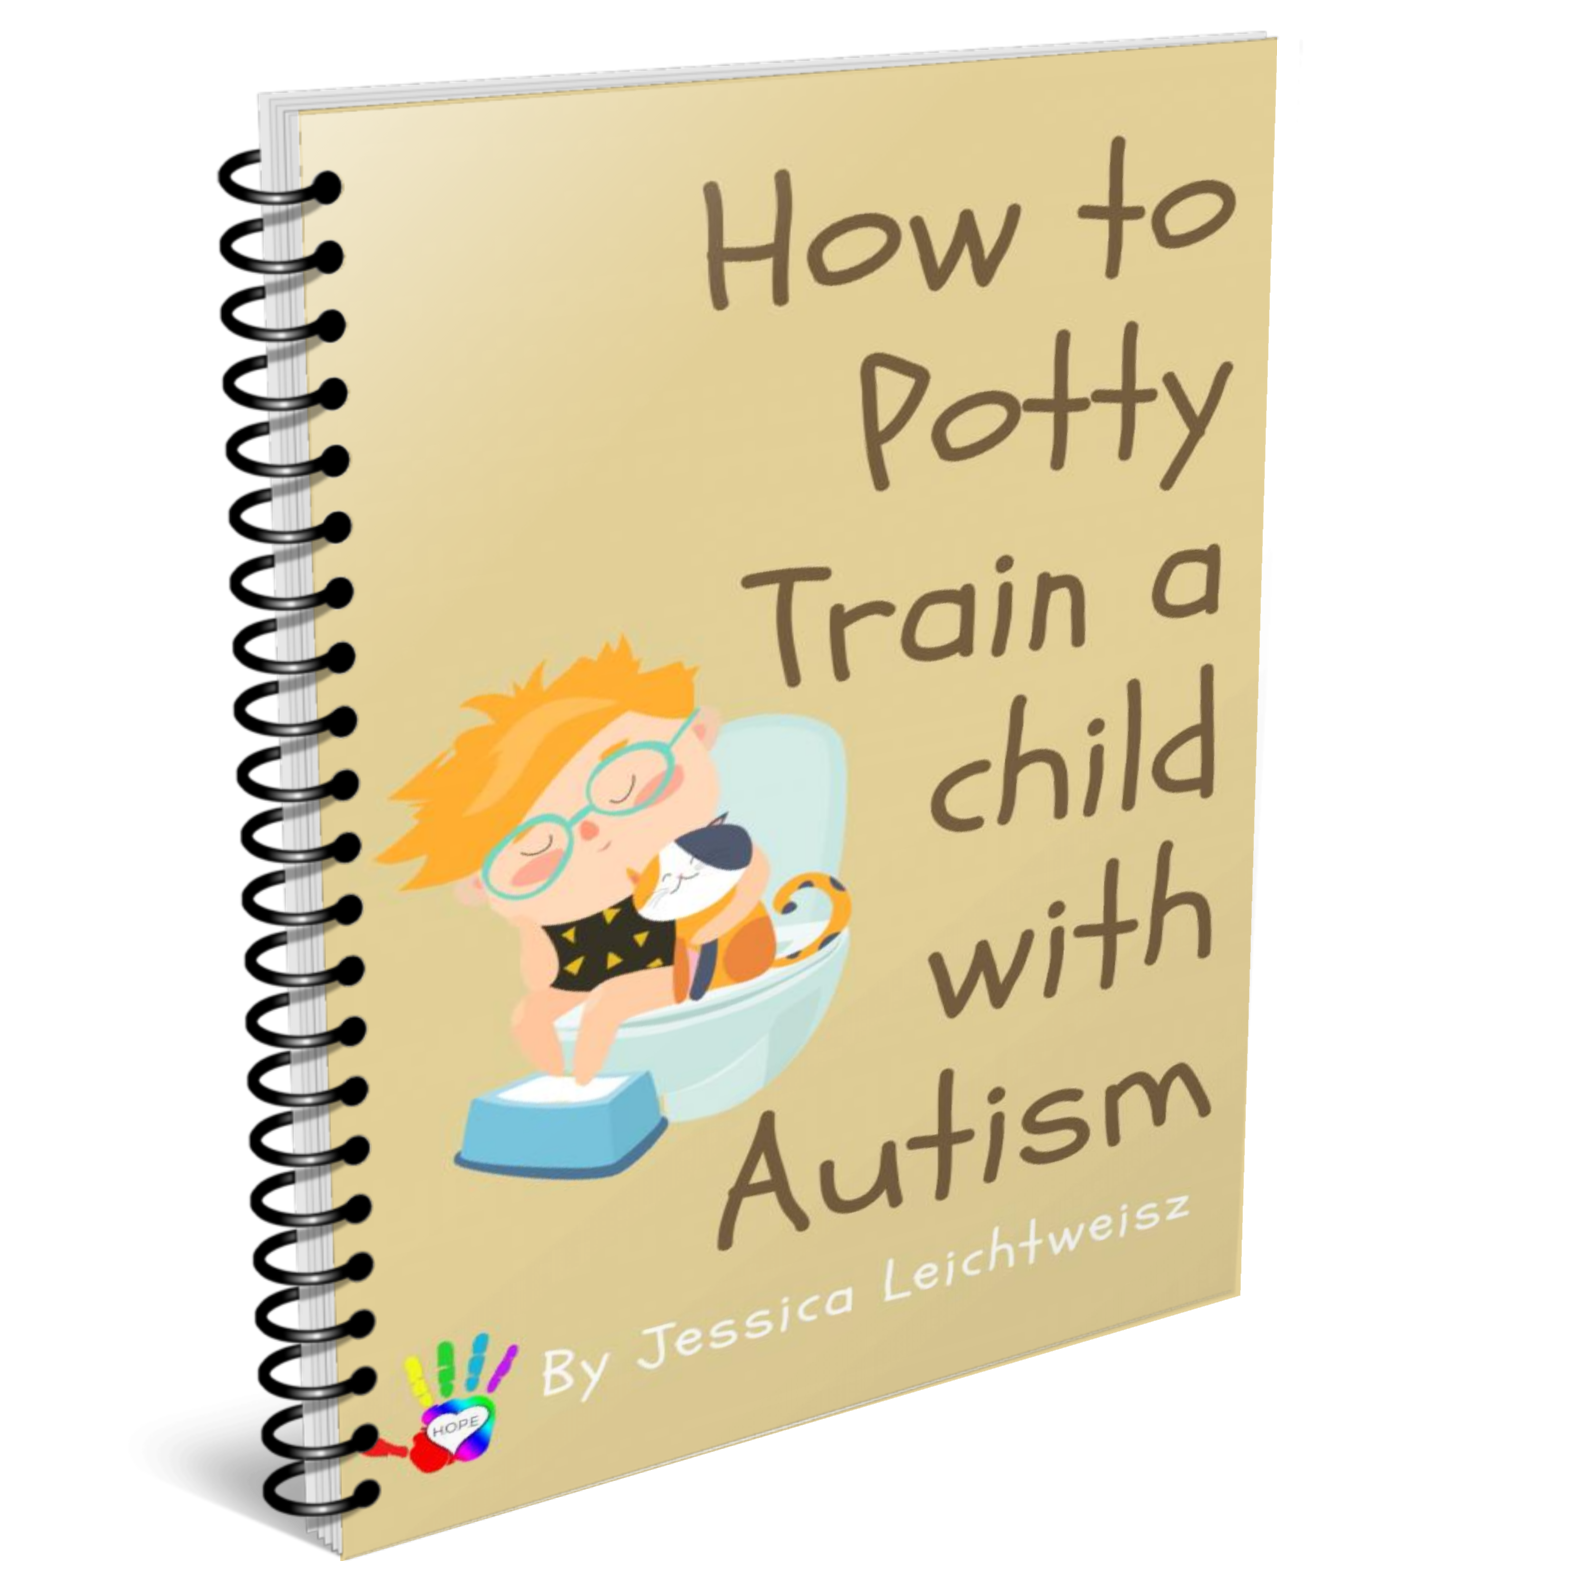 How to Potty Train Your Child With Autism